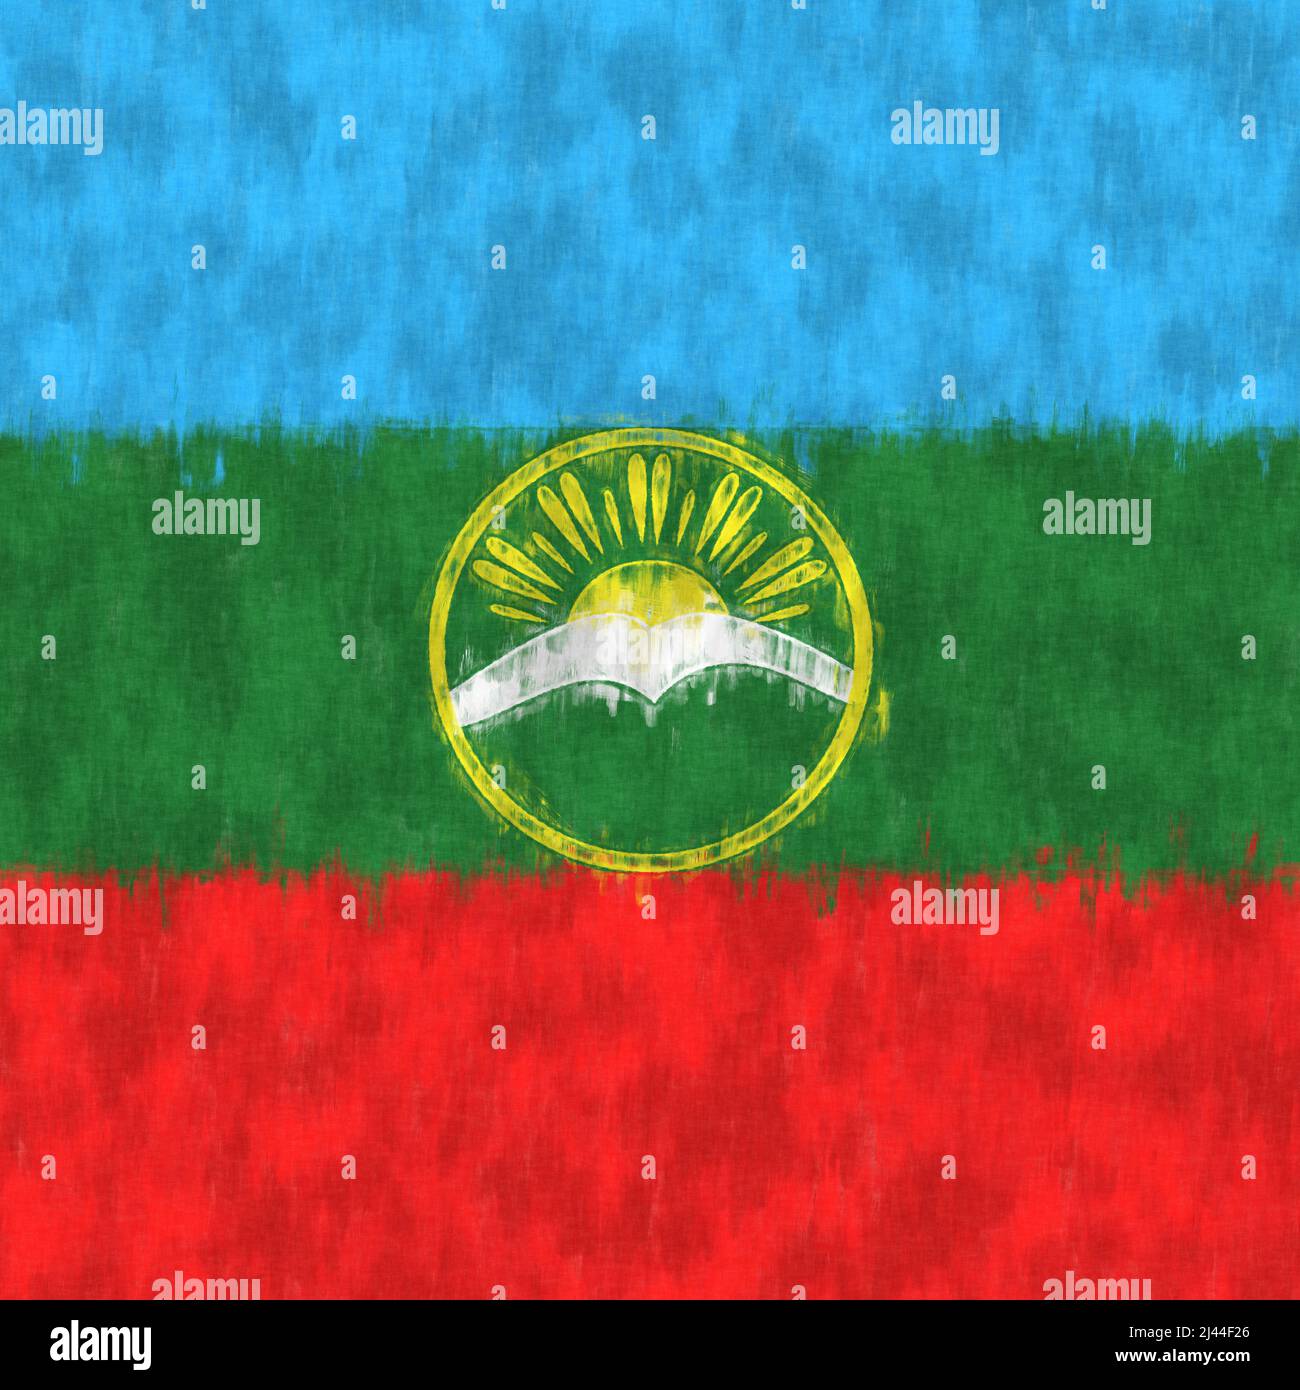 Karachay-Cherkessia oil painting. Karachay-Cherkess emblem drawing canvas. A painted picture of a country's flag. Stock Photo